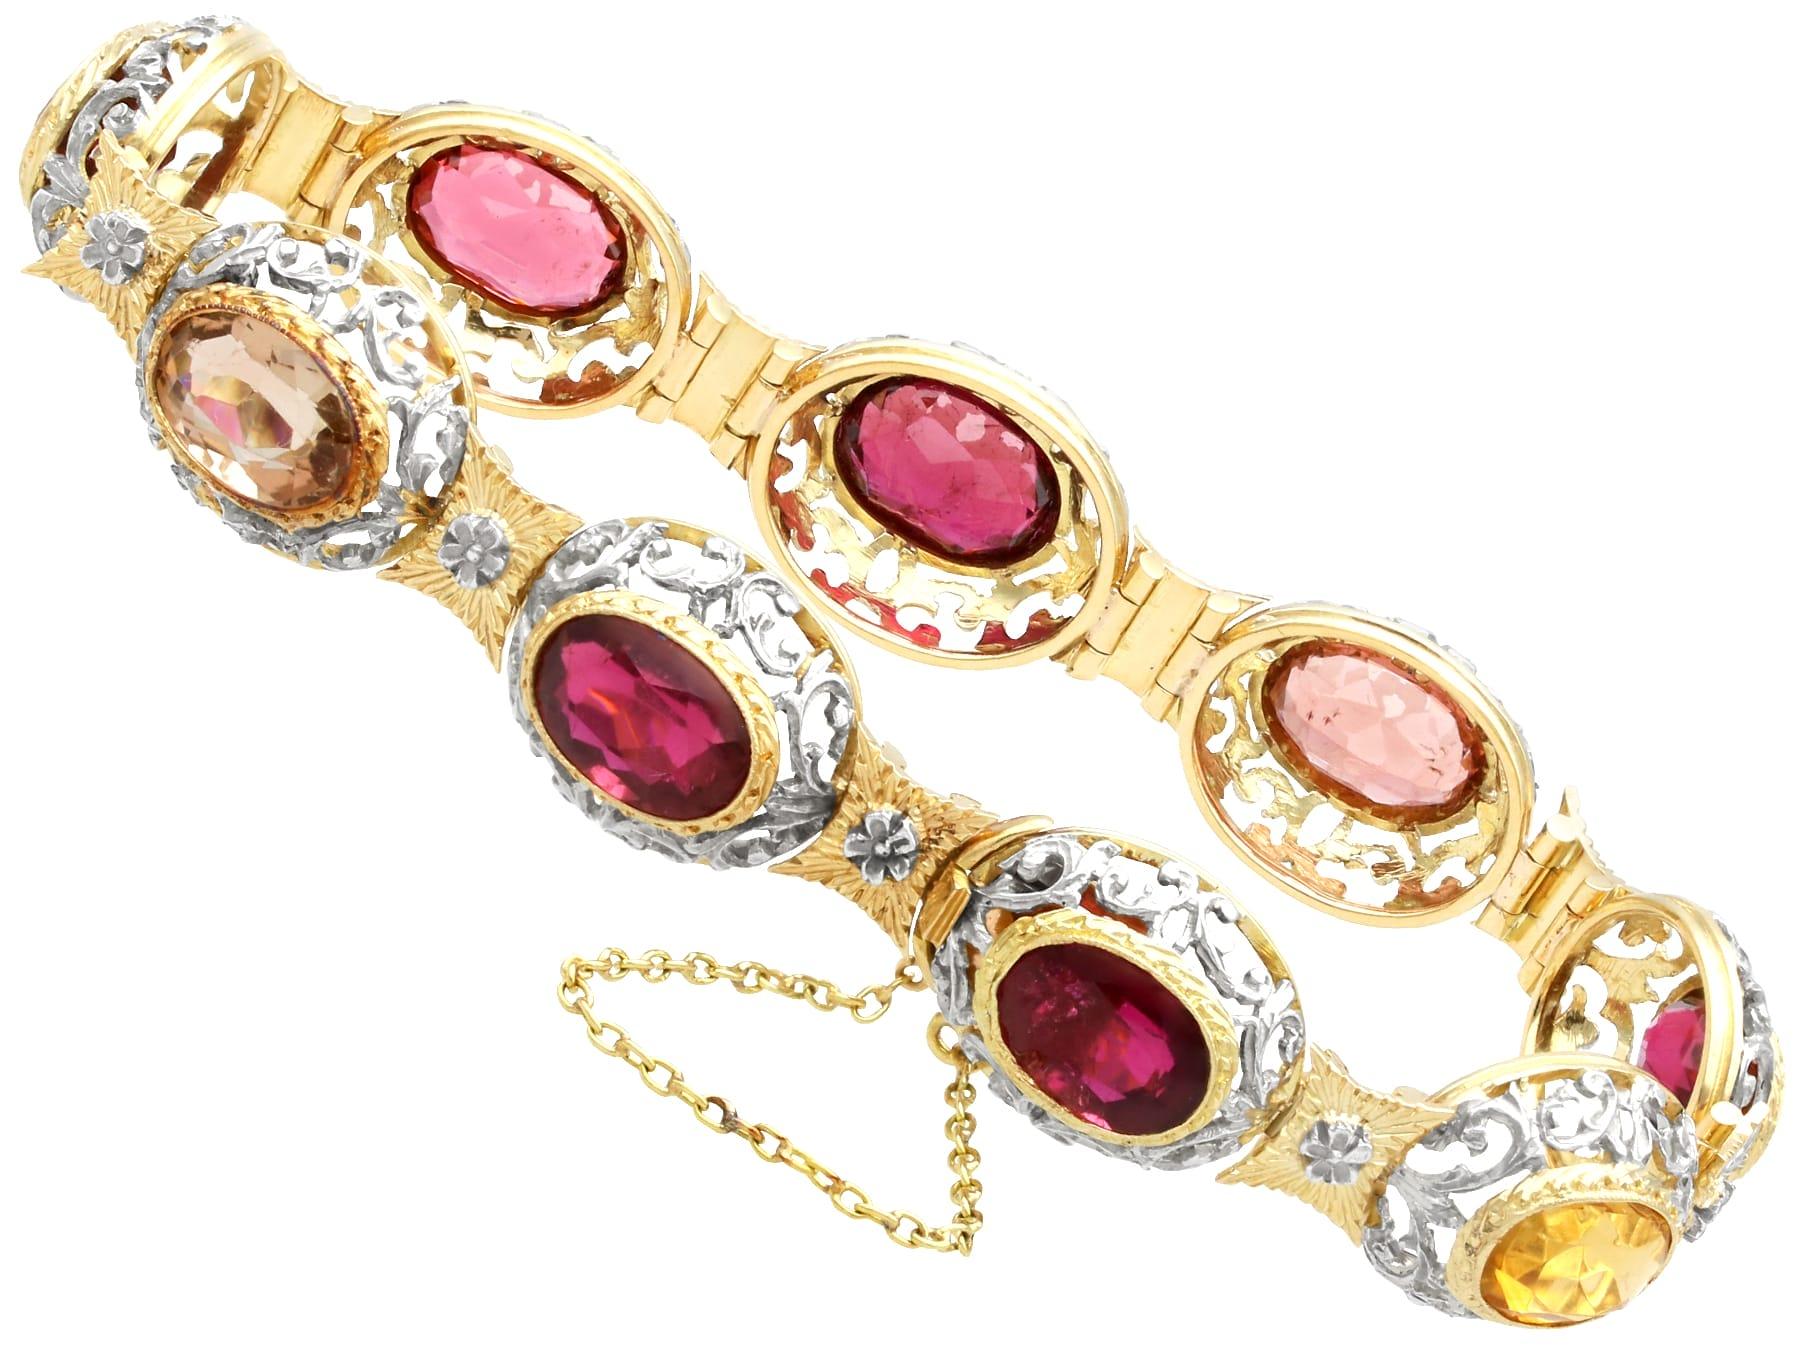 Antique 22.82 Carat Garnet and 1.95 Carat Citrine 10k Yellow Gold Bracelet In Excellent Condition For Sale In Jesmond, Newcastle Upon Tyne